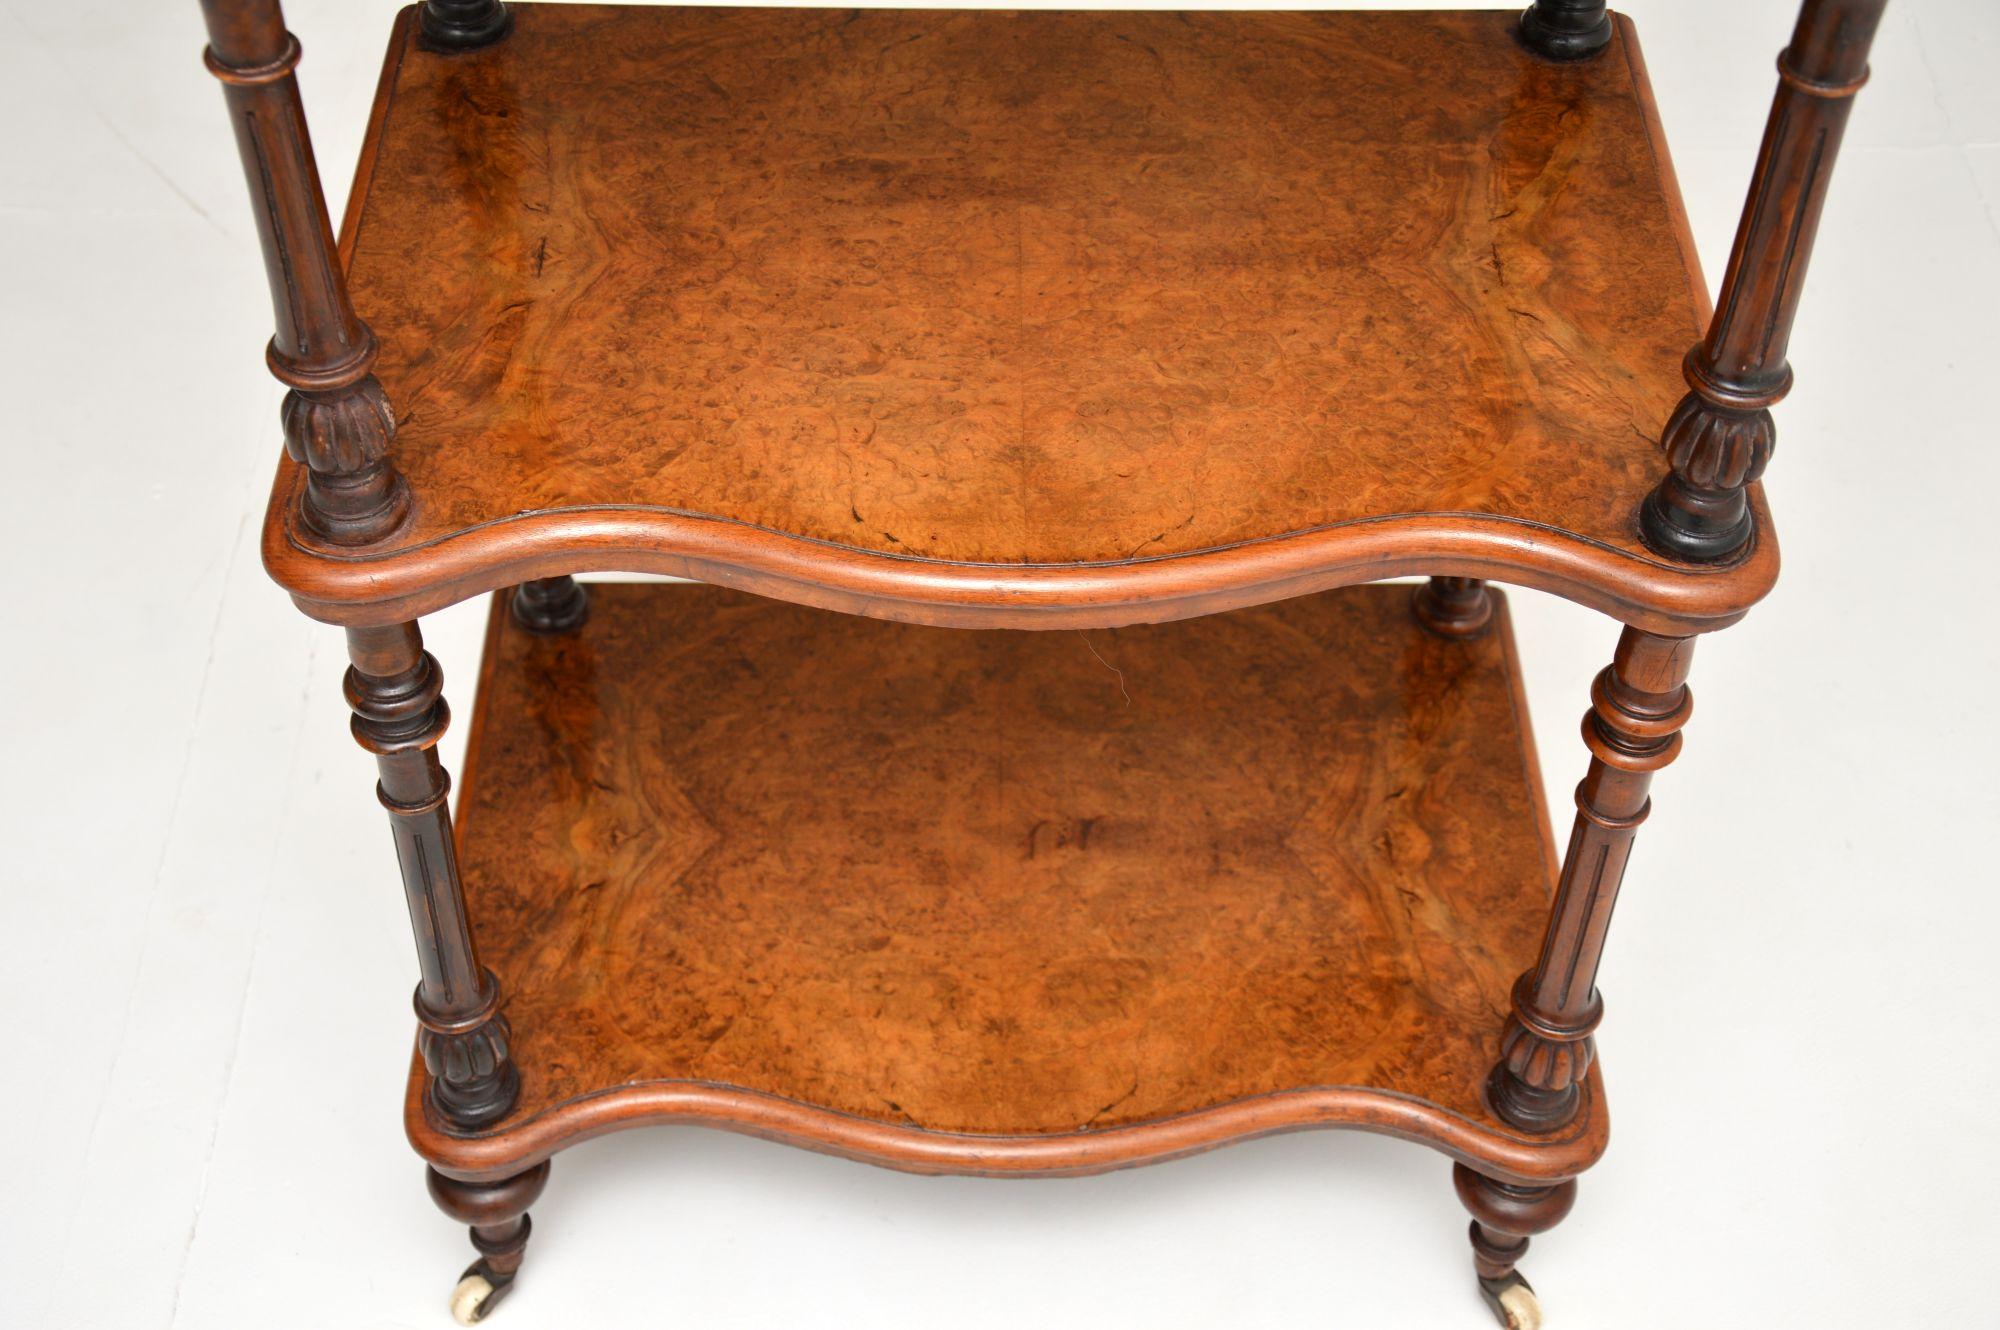 19th Century Antique Victorian Burr Walnut Whatnot Side Table